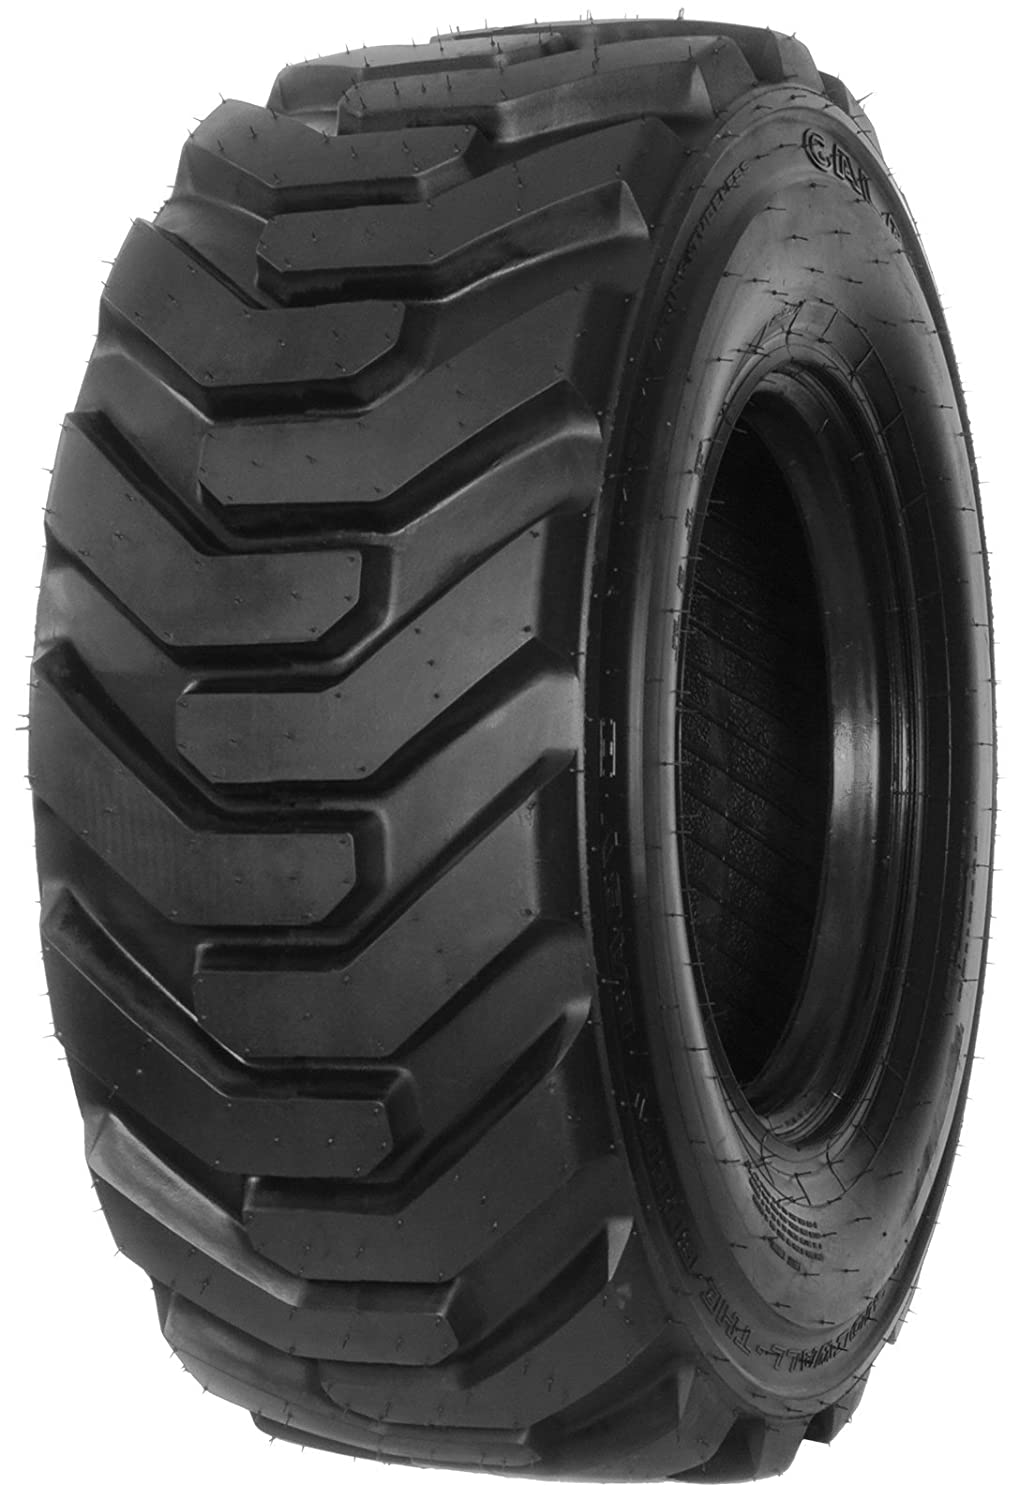 product_type-industrial_tires Galaxy Beefy Baby R-4 10PR TL 10.5/80 R18 P